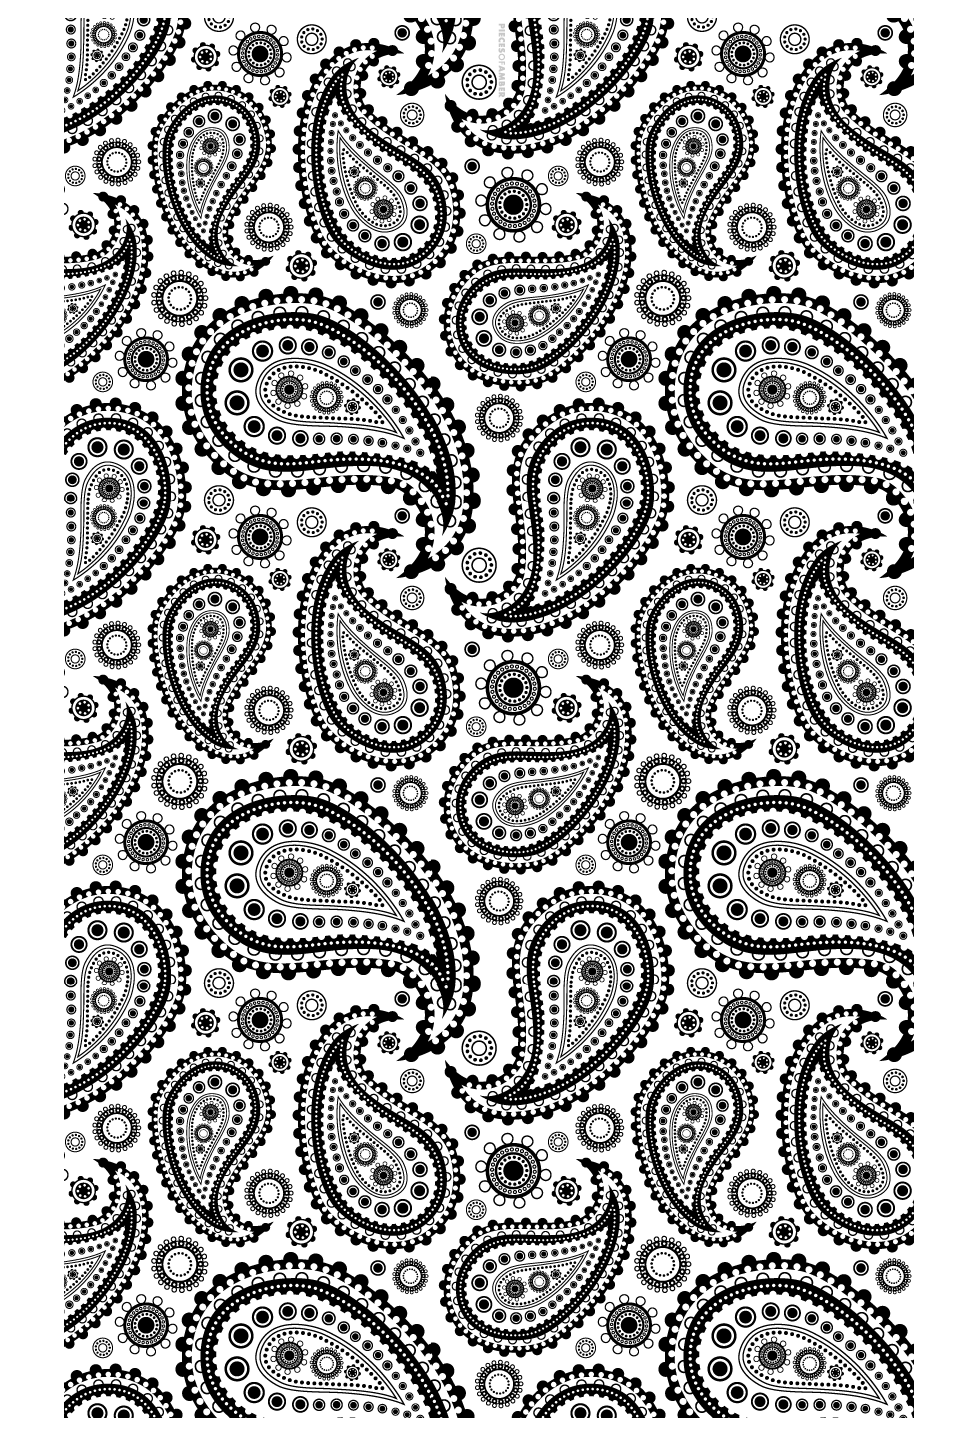 Color these Paisley patterns, drawn with different kind of details.